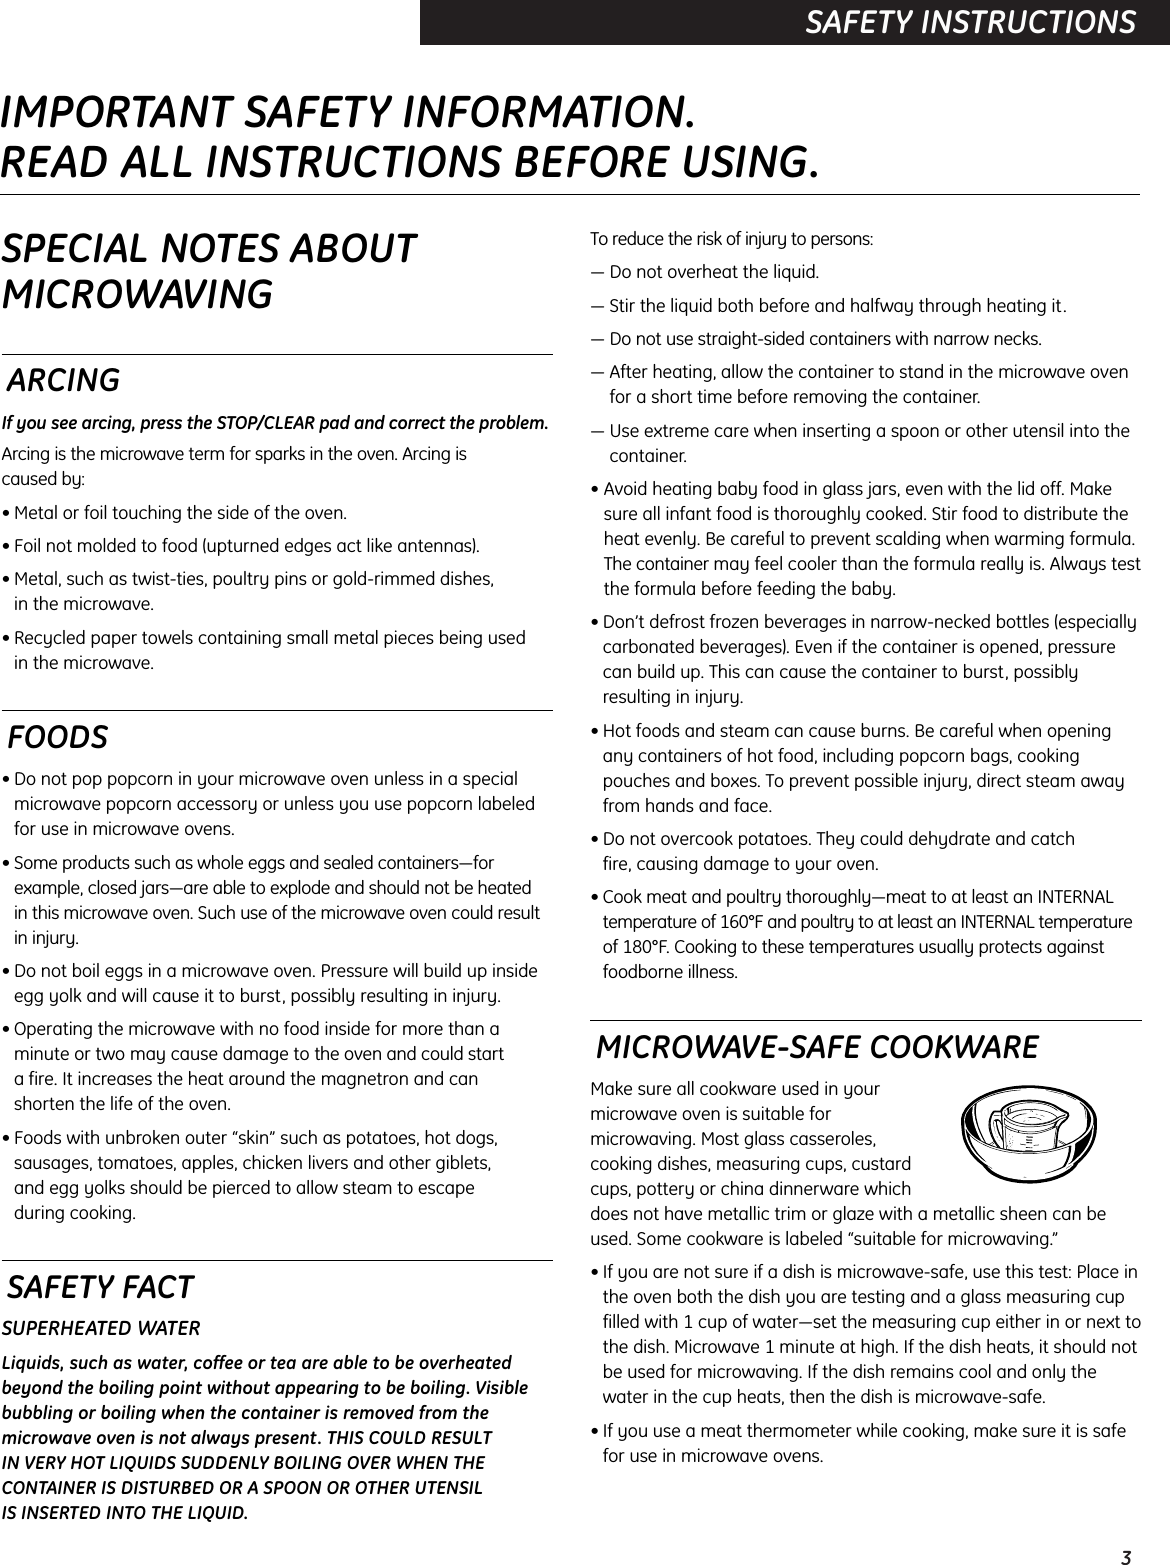 3SAFETY INSTRUCTIONSSPECIAL NOTES ABOUTMICROWAVINGARCINGIf you see arcing, press the STOP/CLEAR pad and correct the problem.Arcing is the microwave term for sparks in the oven. Arcing is caused by:• Metal or foil touching the side of the oven.• Foil not molded to food (upturned edges act like antennas).• Metal, such as twist-ties, poultry pins or gold-rimmed dishes, in the microwave.• Recycled paper towels containing small metal pieces being used in the microwave.FOODS• Do not pop popcorn in your microwave oven unless in a specialmicrowave popcorn accessory or unless you use popcorn labeledfor use in microwave ovens.• Some products such as whole eggs and sealed containers—forexample, closed jars—are able to explode and should not be heated in this microwave oven. Such use of the microwave oven could resultin injury.• Do not boil eggs in a microwave oven. Pressure will build up insideegg yolk and will cause it to burst, possibly resulting in injury.• Operating the microwave with no food inside for more than aminute or two may cause damage to the oven and could start a fire. It increases the heat around the magnetron and can shorten the life of the oven.• Foods with unbroken outer “skin” such as potatoes, hot dogs,sausages, tomatoes, apples, chicken livers and other giblets, and egg yolks should be pierced to allow steam to escape during cooking.SAFETY FACTSUPERHEATED WATERLiquids, such as water, coffee or tea are able to be overheatedbeyond the boiling point without appearing to be boiling. Visiblebubbling or boiling when the container is removed from themicrowave oven is not always present. THIS COULD RESULT IN VERY HOT LIQUIDS SUDDENLY BOILING OVER WHEN THECONTAINER IS DISTURBED OR A SPOON OR OTHER UTENSIL IS INSERTED INTO THE LIQUID.To reduce the risk of injury to persons:— Do not overheat the liquid.— Stir the liquid both before and halfway through heating it.— Do not use straight-sided containers with narrow necks.— After heating, allow the container to stand in the microwave ovenfor a short time before removing the container.— Use extreme care when inserting a spoon or other utensil into thecontainer.• Avoid heating baby food in glass jars, even with the lid off. Makesure all infant food is thoroughly cooked. Stir food to distribute theheat evenly. Be careful to prevent scalding when warming formula.The container may feel cooler than the formula really is. Always testthe formula before feeding the baby.• Don’t defrost frozen beverages in narrow-necked bottles (especiallycarbonated beverages). Even if the container is opened, pressurecan build up. This can cause the container to burst, possiblyresulting in injury.• Hot foods and steam can cause burns. Be careful when opening any containers of hot food, including popcorn bags, cookingpouches and boxes. To prevent possible injury, direct steam awayfrom hands and face.• Do not overcook potatoes. They could dehydrate and catch fire, causing damage to your oven.• Cook meat and poultry thoroughly—meat to at least an INTERNAL temperature of 160°F and poultry to at least an INTERNAL temperature of 180°F. Cooking to these temperatures usually protects againstfoodborne illness.MICROWAVE-SAFE COOKWAREMake sure all cookware used in yourmicrowave oven is suitable formicrowaving. Most glass casseroles,cooking dishes, measuring cups, custardcups, pottery or china dinnerware whichdoes not have metallic trim or glaze with a metallic sheen can beused. Some cookware is labeled “suitable for microwaving.”• If you are not sure if a dish is microwave-safe, use this test: Place inthe oven both the dish you are testing and a glass measuring cupfilled with 1 cup of water—set the measuring cup either in or next tothe dish. Microwave 1 minute at high. If the dish heats, it should notbe used for microwaving. If the dish remains cool and only thewater in the cup heats, then the dish is microwave-safe.• If you use a meat thermometer while cooking, make sure it is safefor use in microwave ovens.IMPORTANT SAFETY INFORMATION.READ ALL INSTRUCTIONS BEFORE USING.